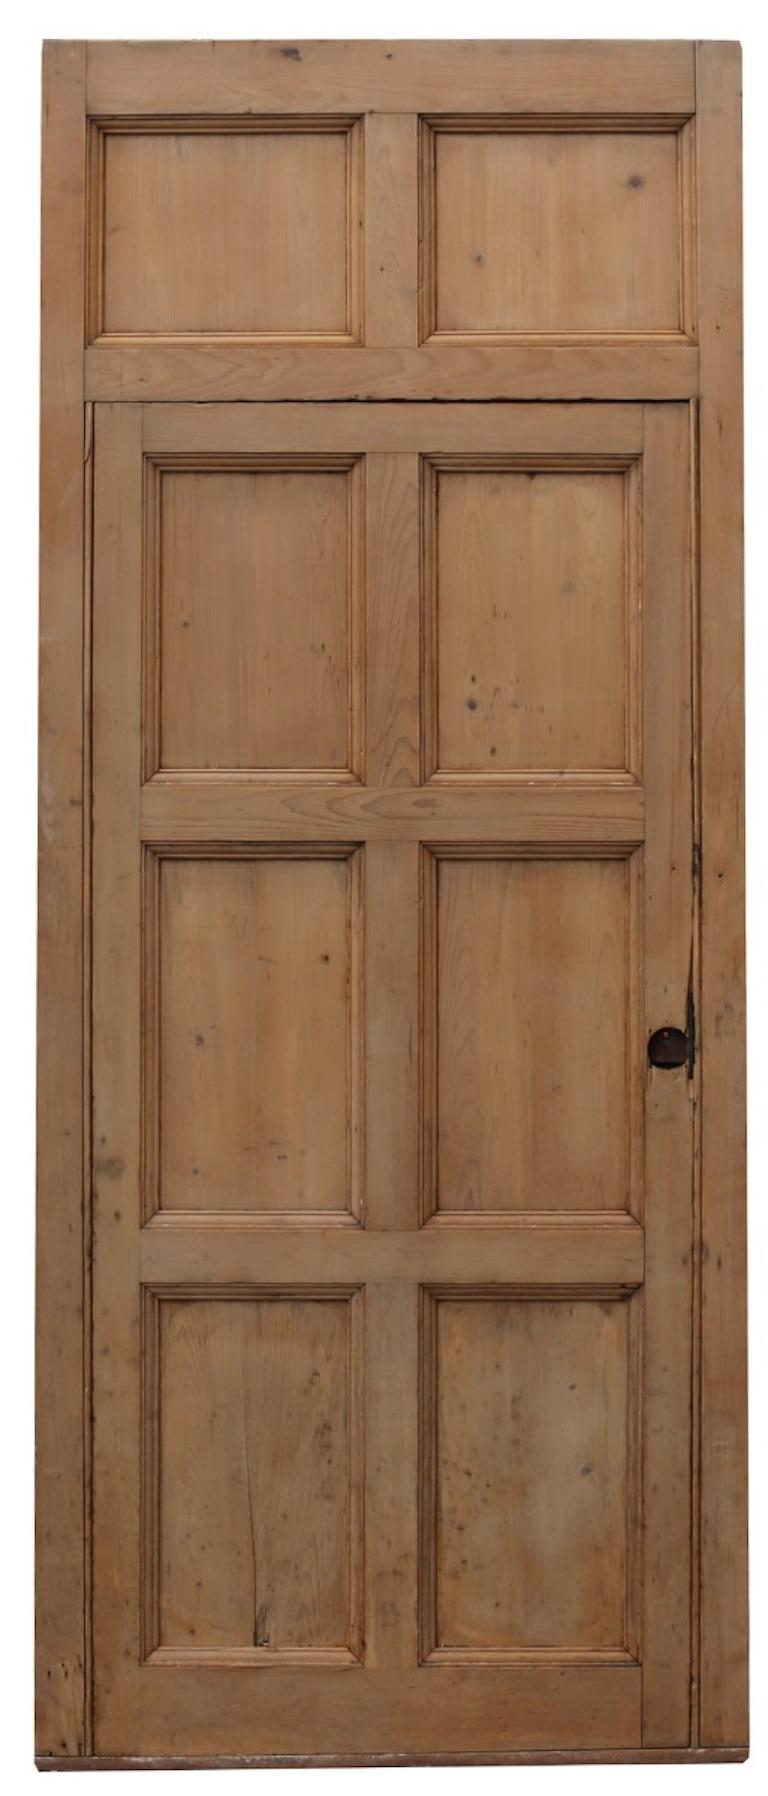 A reclaimed door fitted within its original frame.

Additional dimensions:

Overall

Height 251 cm

Width 104 cm

Thickness 5 cm

Door

Height 195 cm

Width 86.5 cm

Thickness 4 cm.